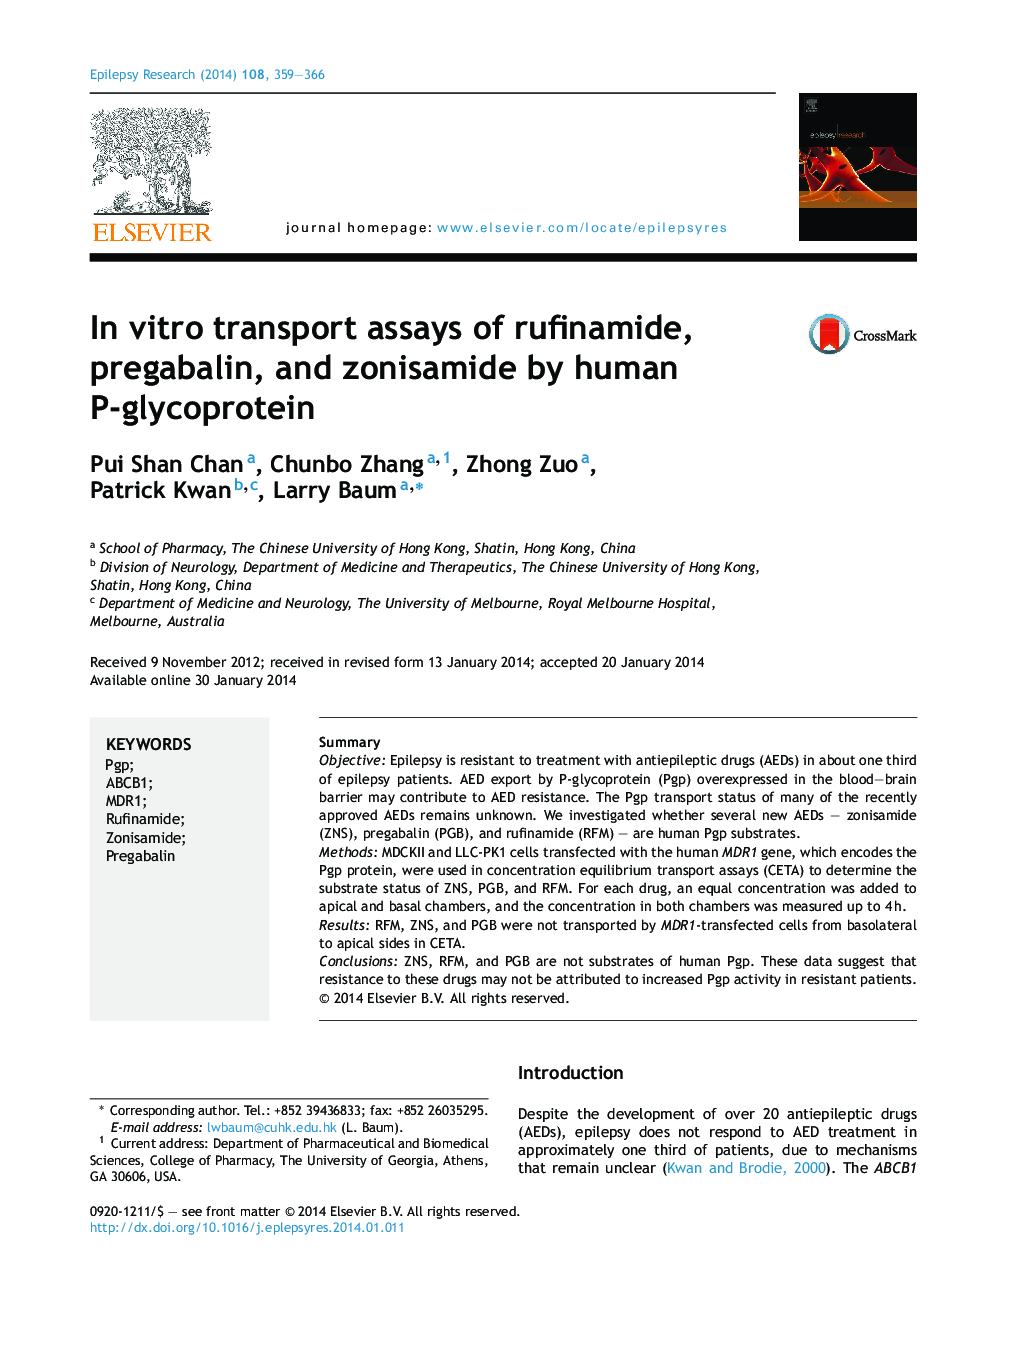 In vitro transport assays of rufinamide, pregabalin, and zonisamide by human P-glycoprotein